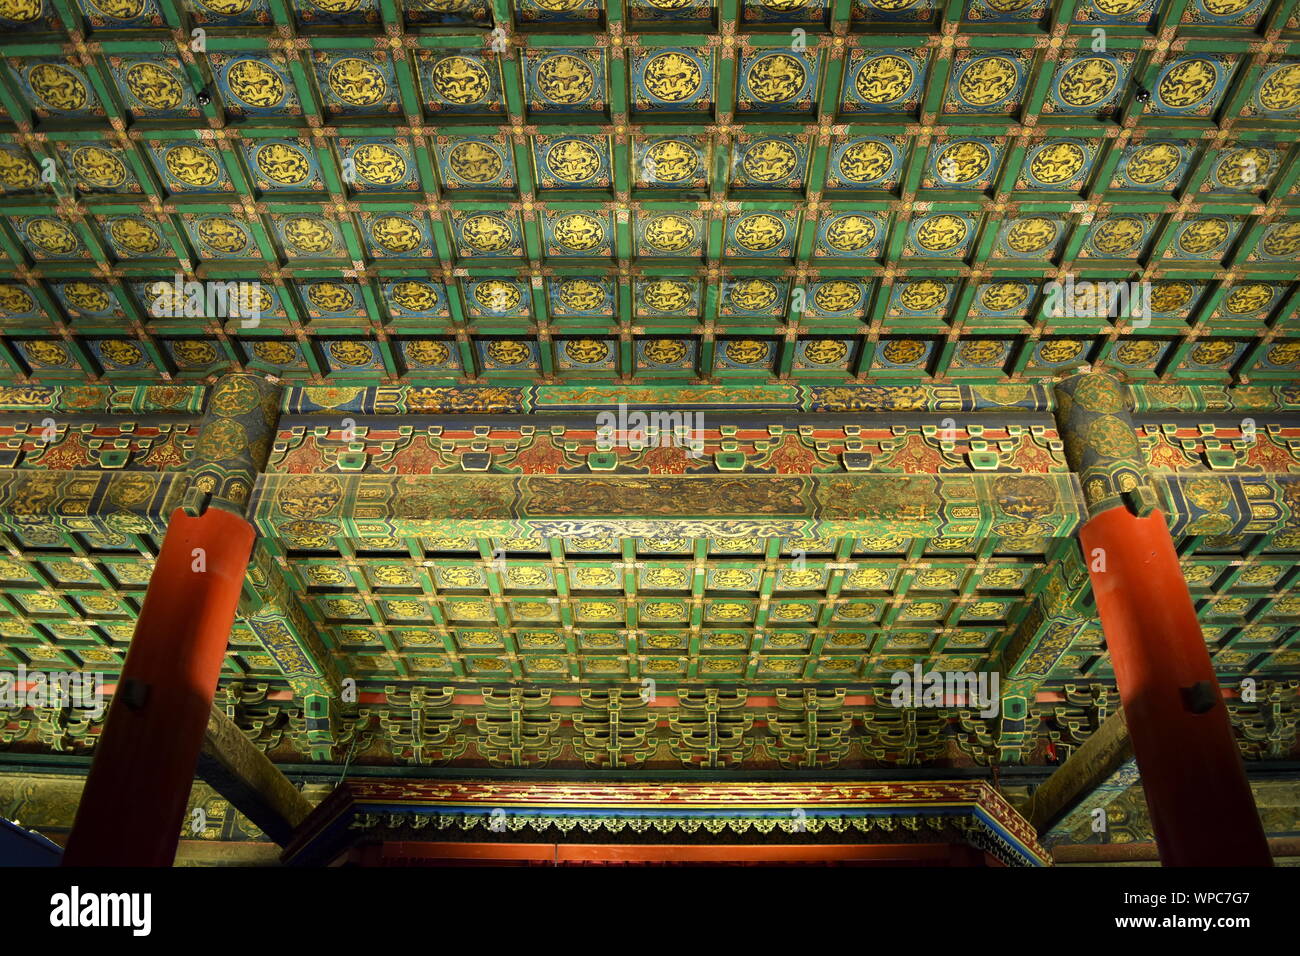 Forbidden City palace beautiful wooden ceiling decoration and classic Chinese art, Beijing, China Stock Photo